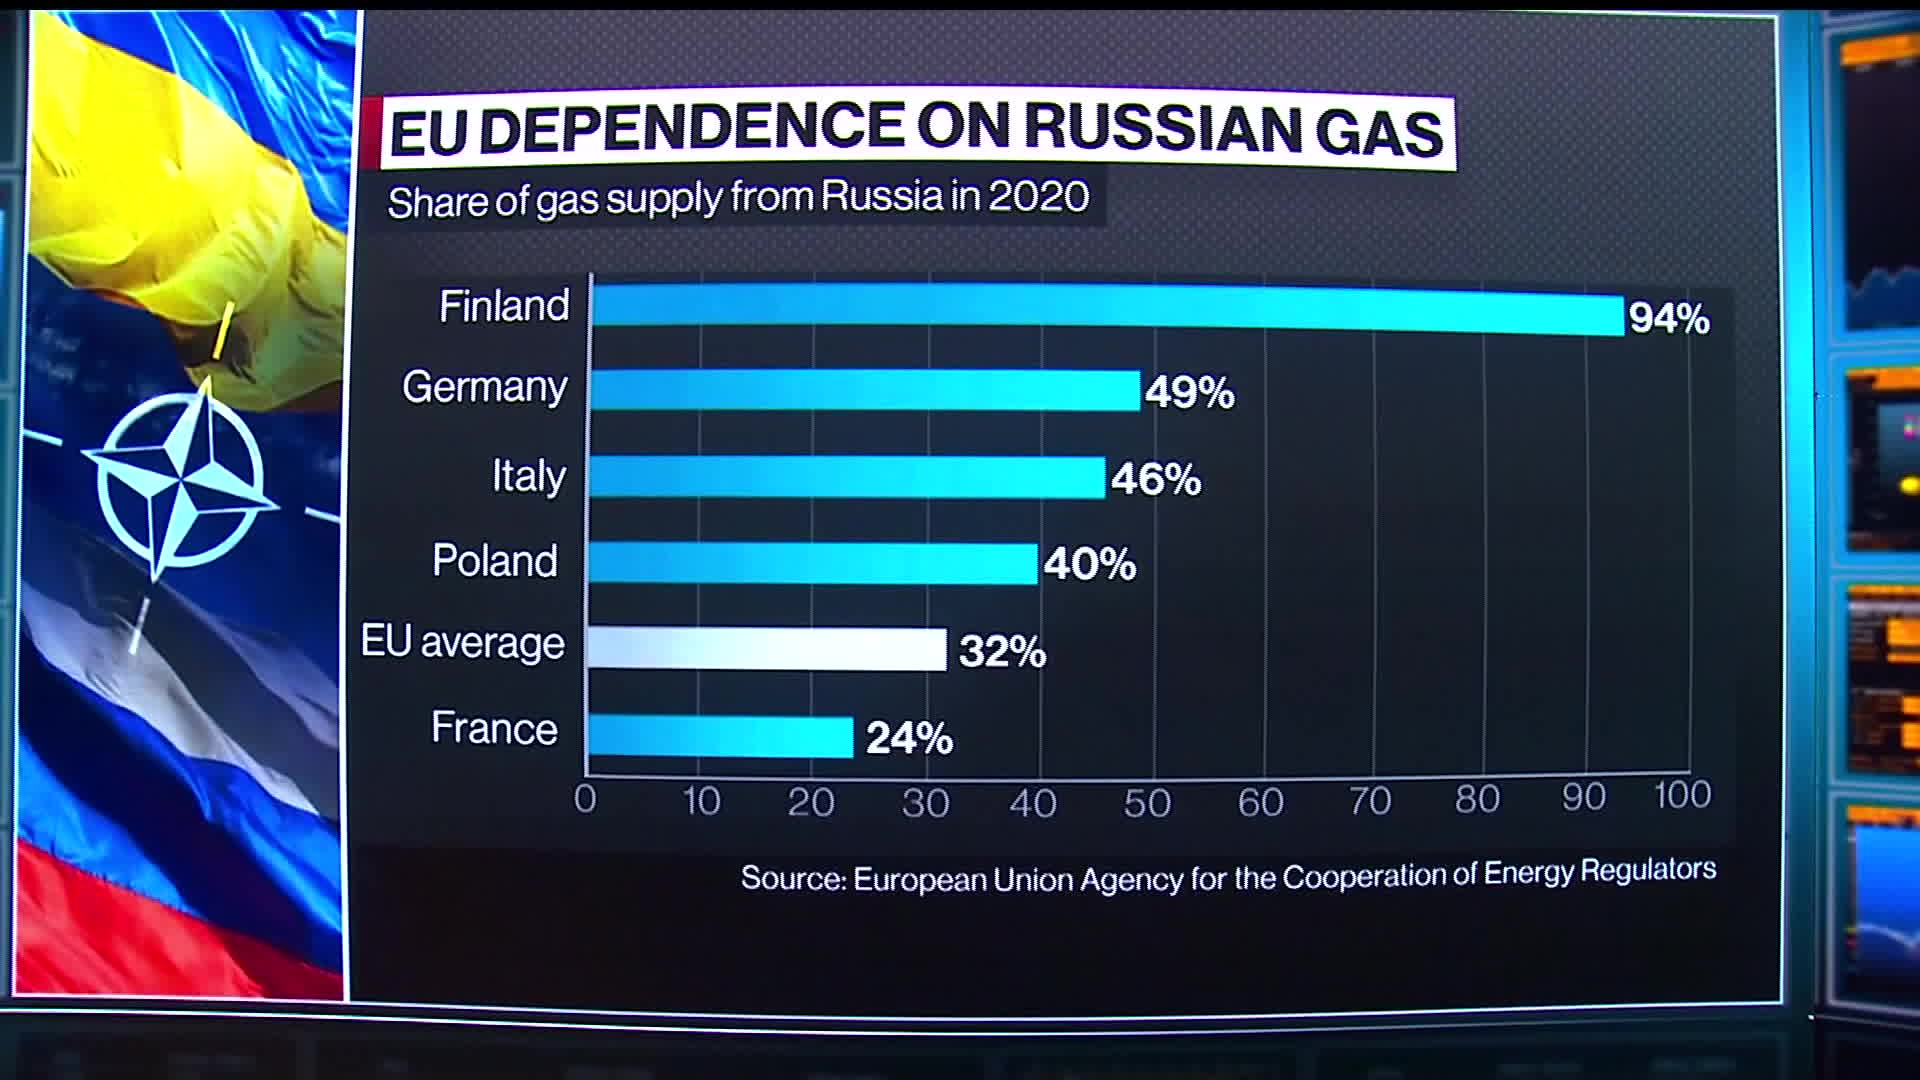 Europe Plans Push to Cut Dependence on Russian Natural Gas - Bloomberg